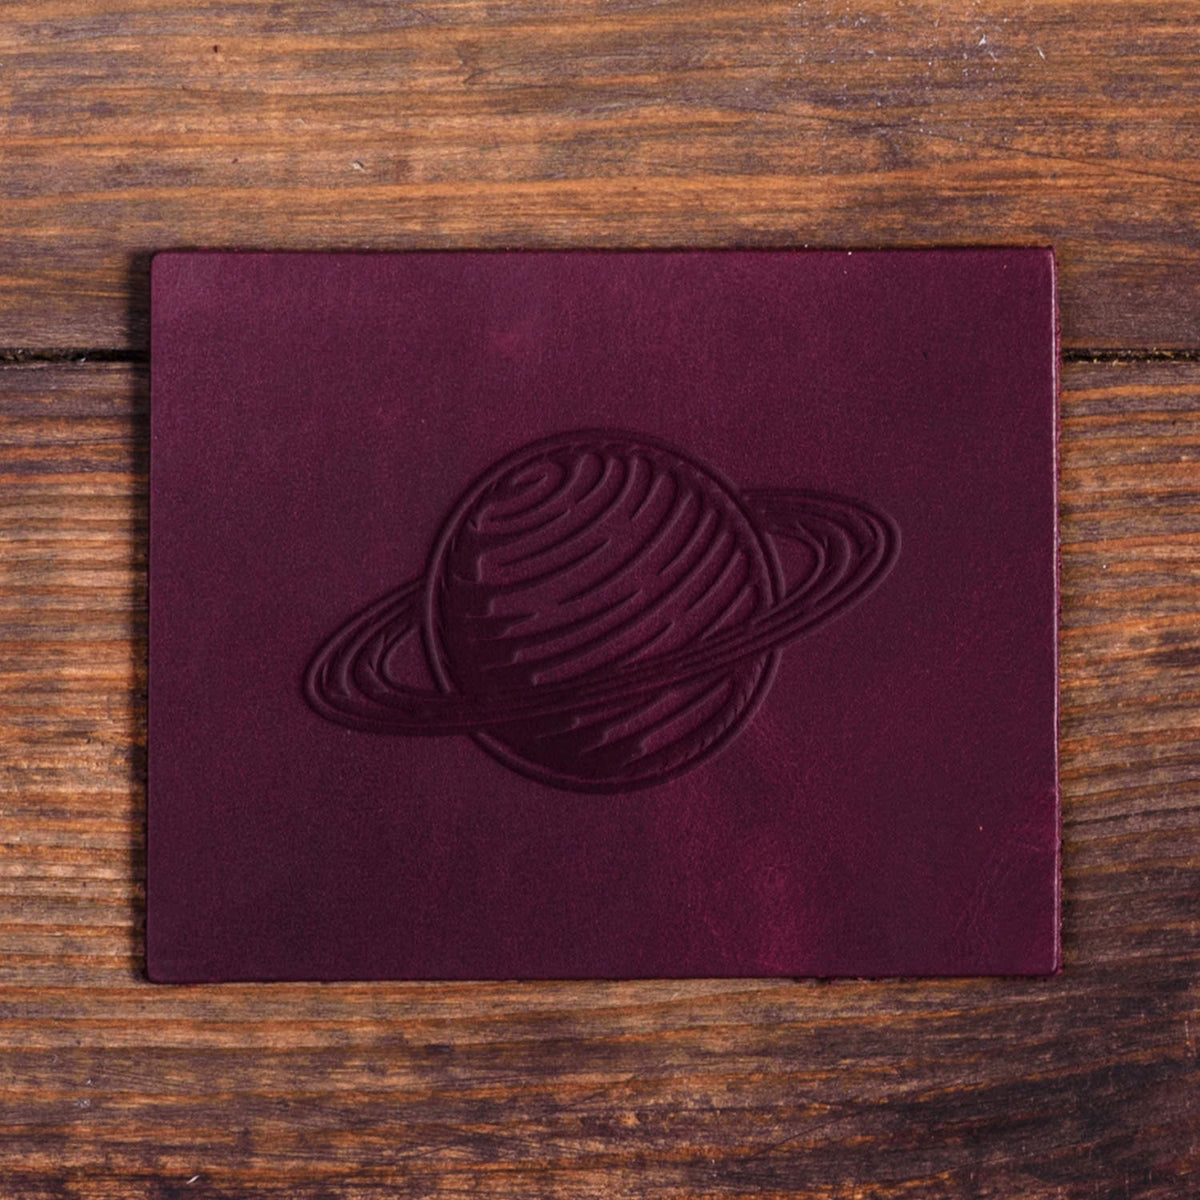 Planet Delrin Leather Stamp